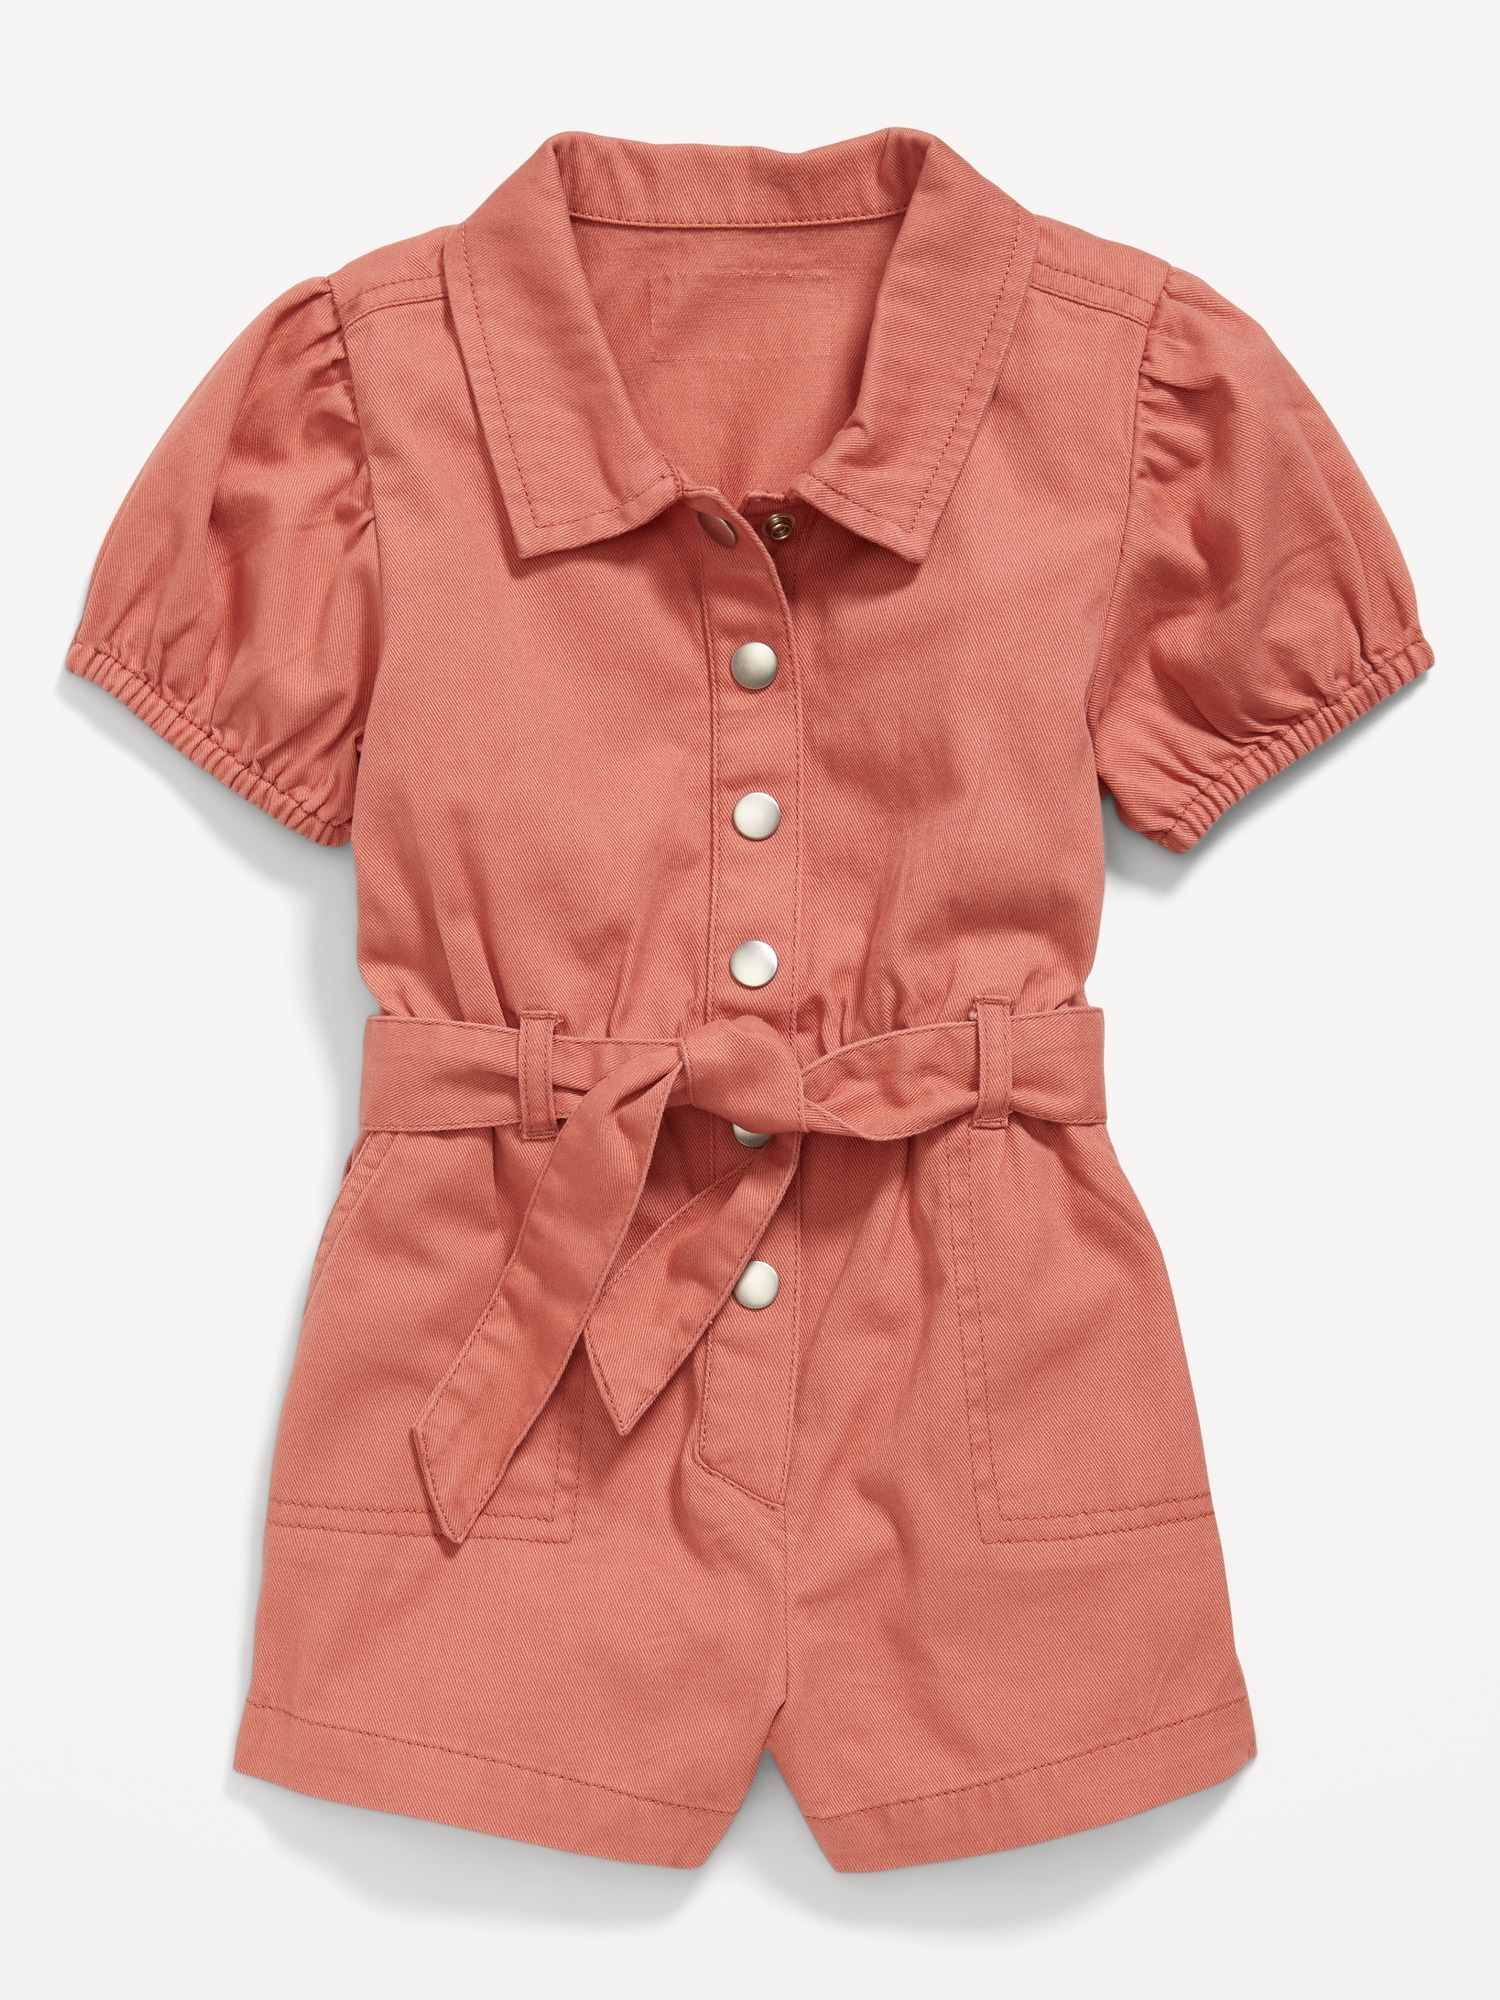 Puff-Sleeve Tie-Front Utility Romper for Toddler Girls Hot Deal